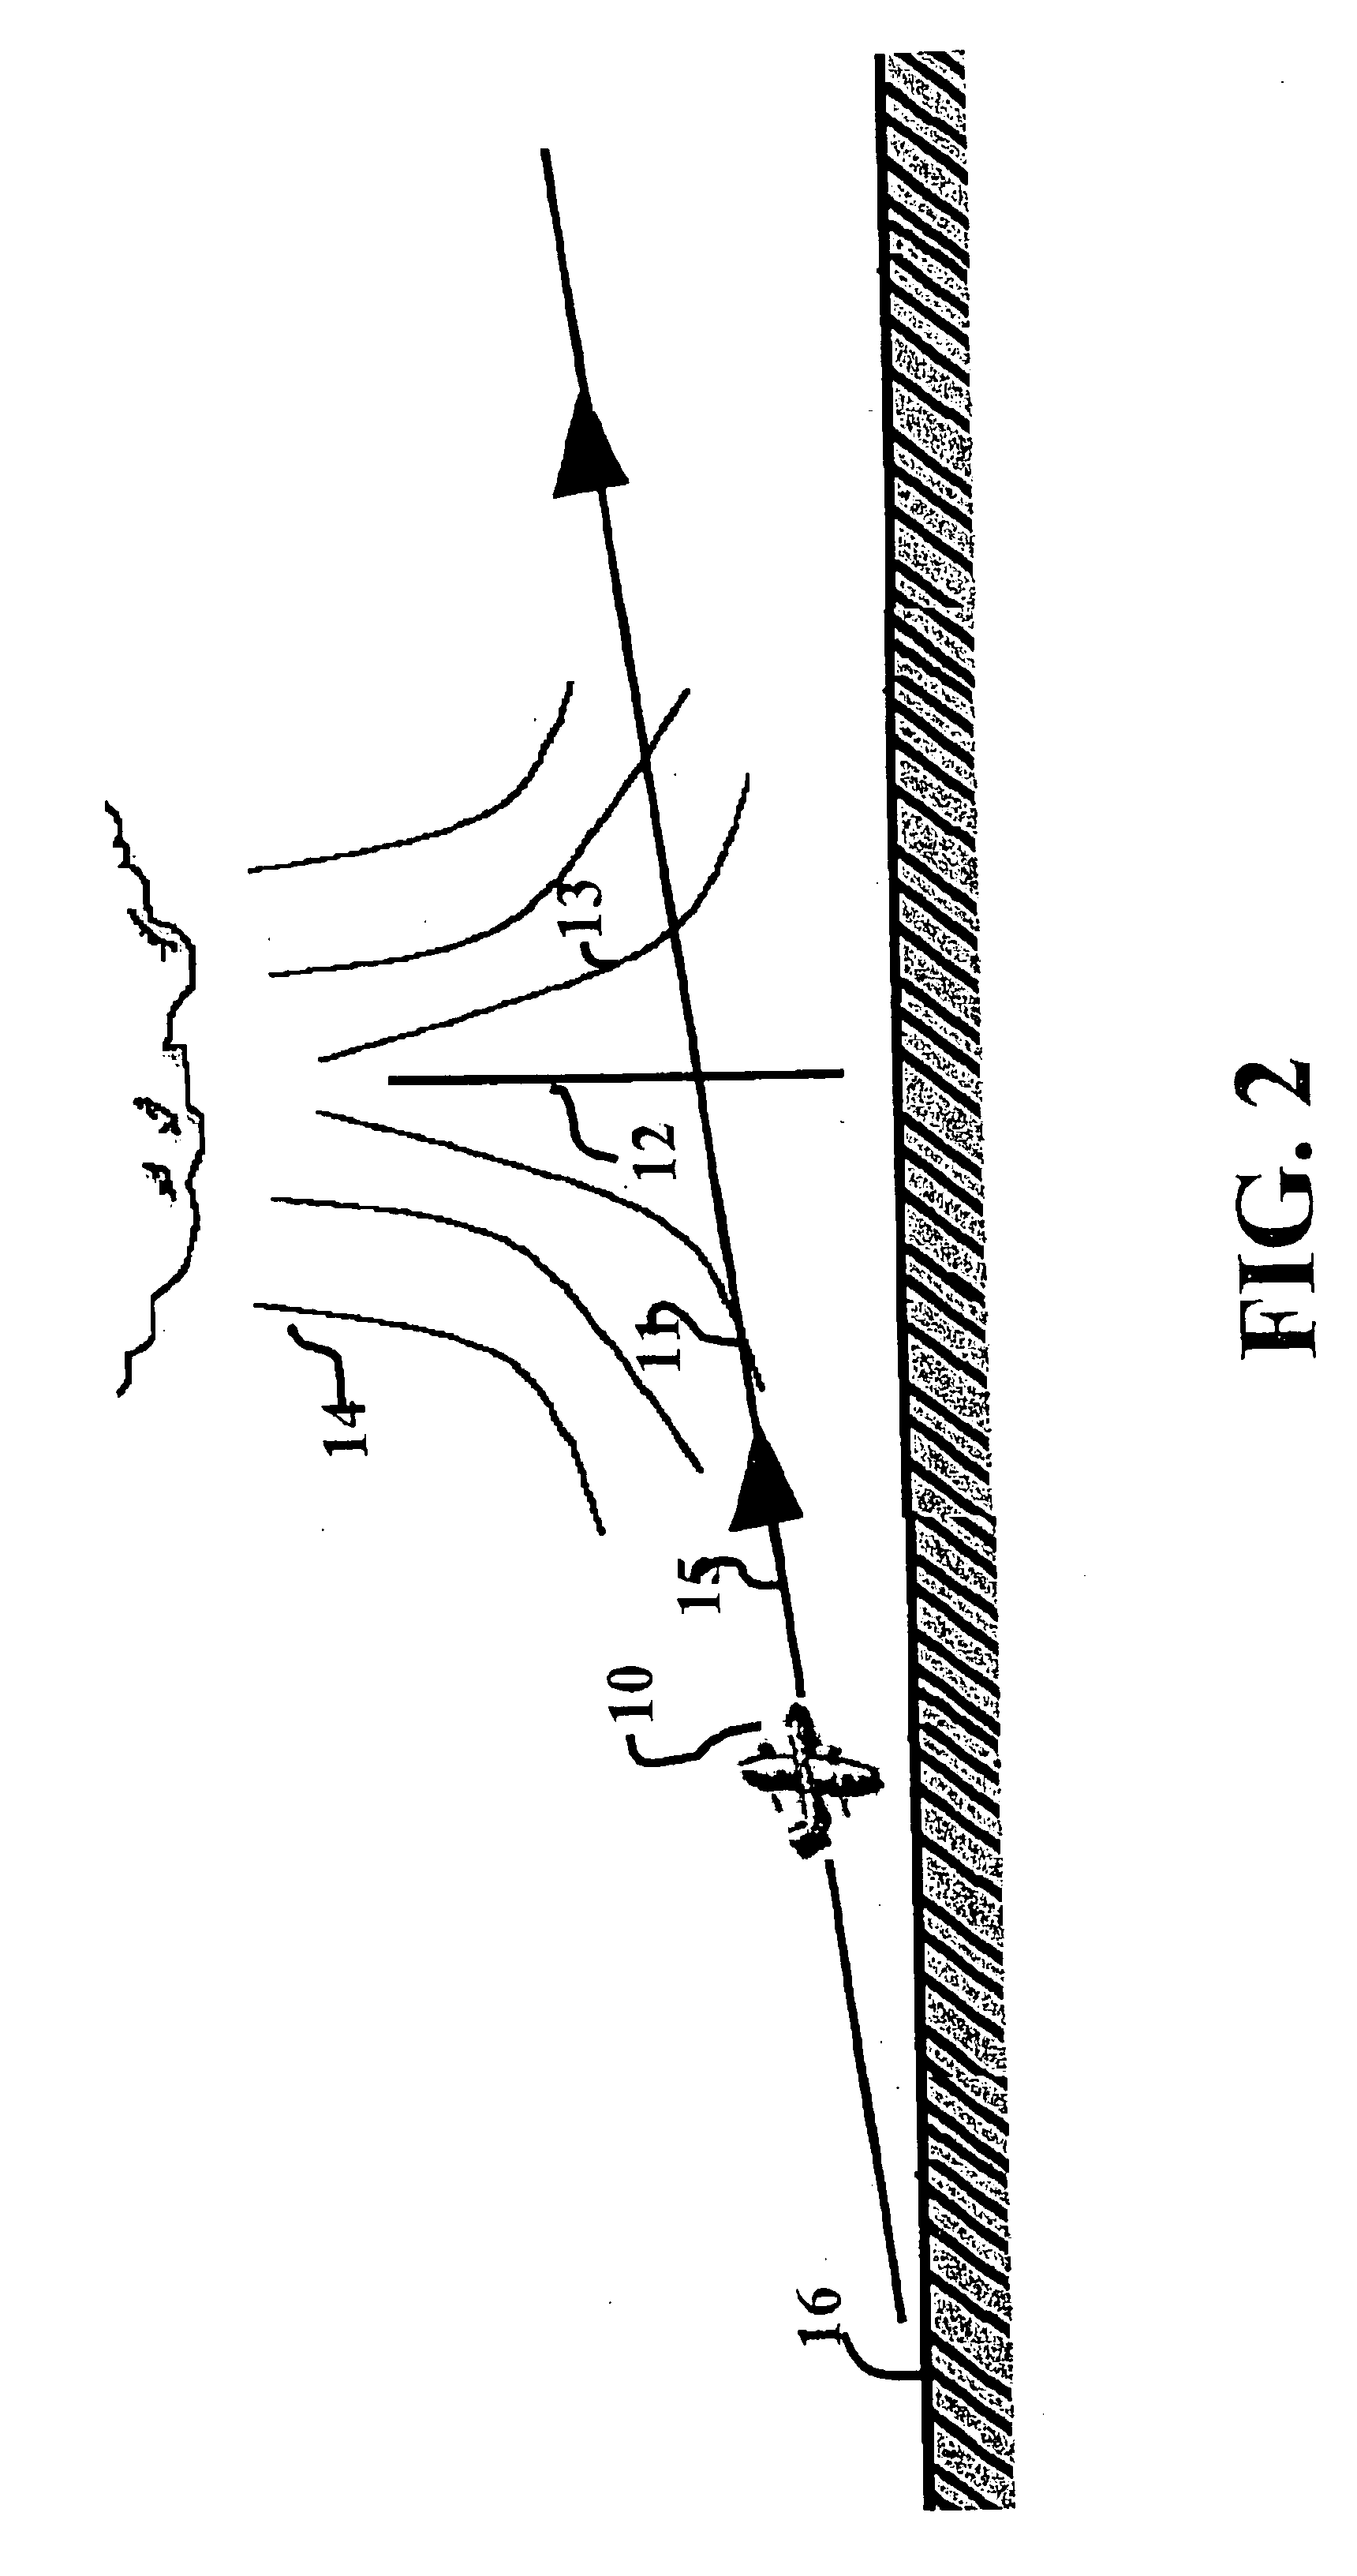 Wind shear detection system